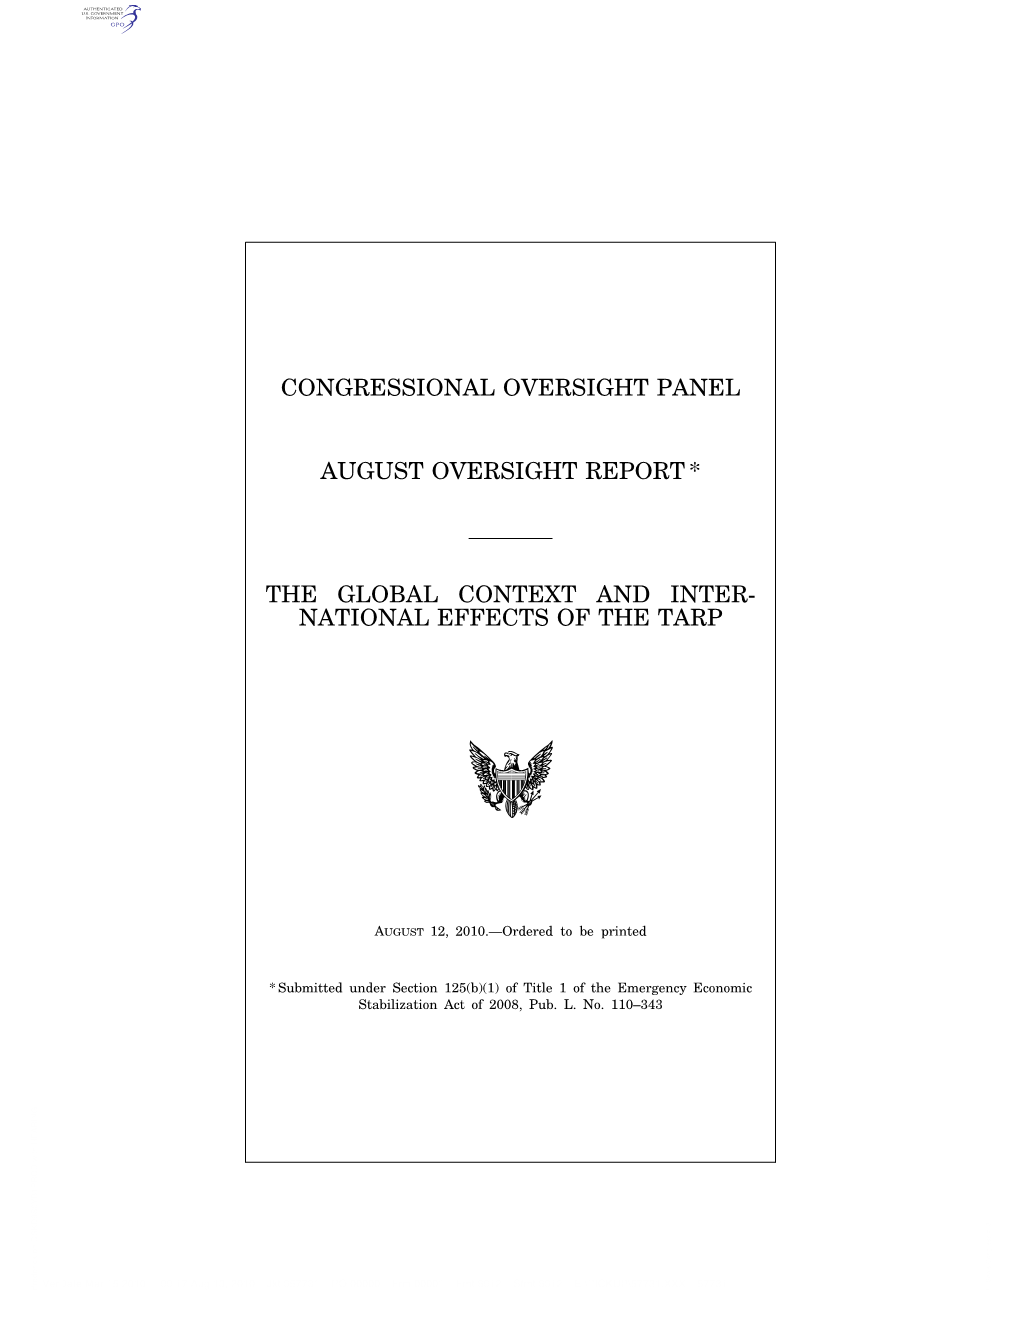 Congressional Oversight Panel August Oversight Report * the Global Context